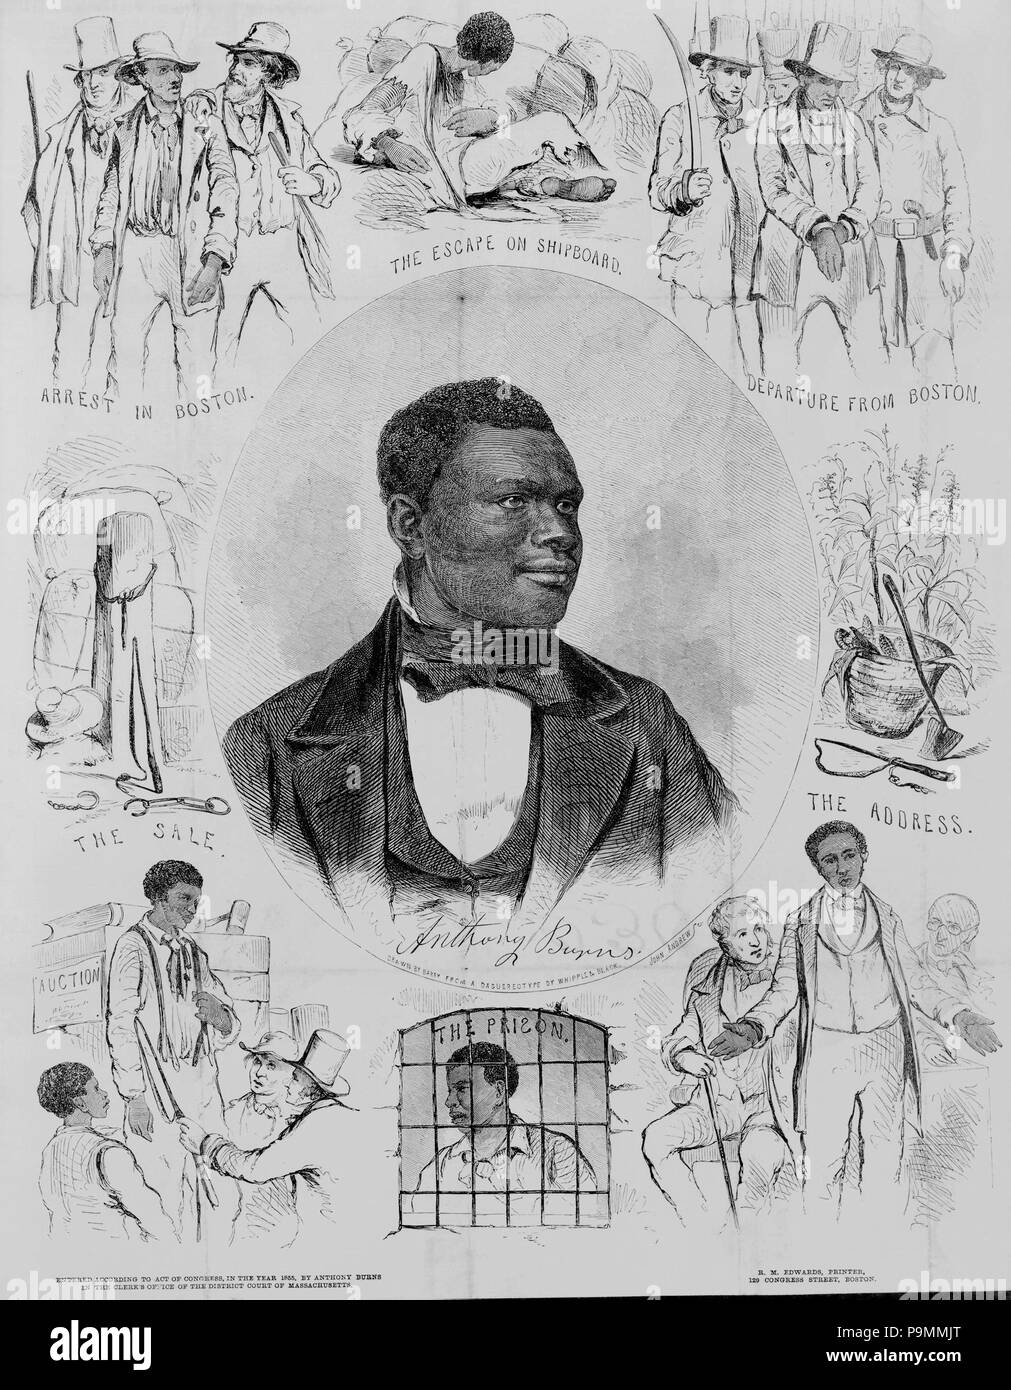 . English: A portrait of the fugitive slave Anthony Burns, whose arrest and trial under the Fugitive Slave Act of 1850 touched off riots and protests by abolitionists and citizens of Boston in the spring of 1854. A bust portrait of the twenty-four-year-old Burns, 'Drawn by Barry from a daguereotype [sic] by Whipple and Black,' is surrounded by scenes from his life. These include (clockwise from lower left): the sale of the youthful Burns at auction, a whipping post with bales of cotton, his arrest in Boston on May 24, 1854, his escape from Richmond on shipboard, his departure from Boston escor Stock Photo